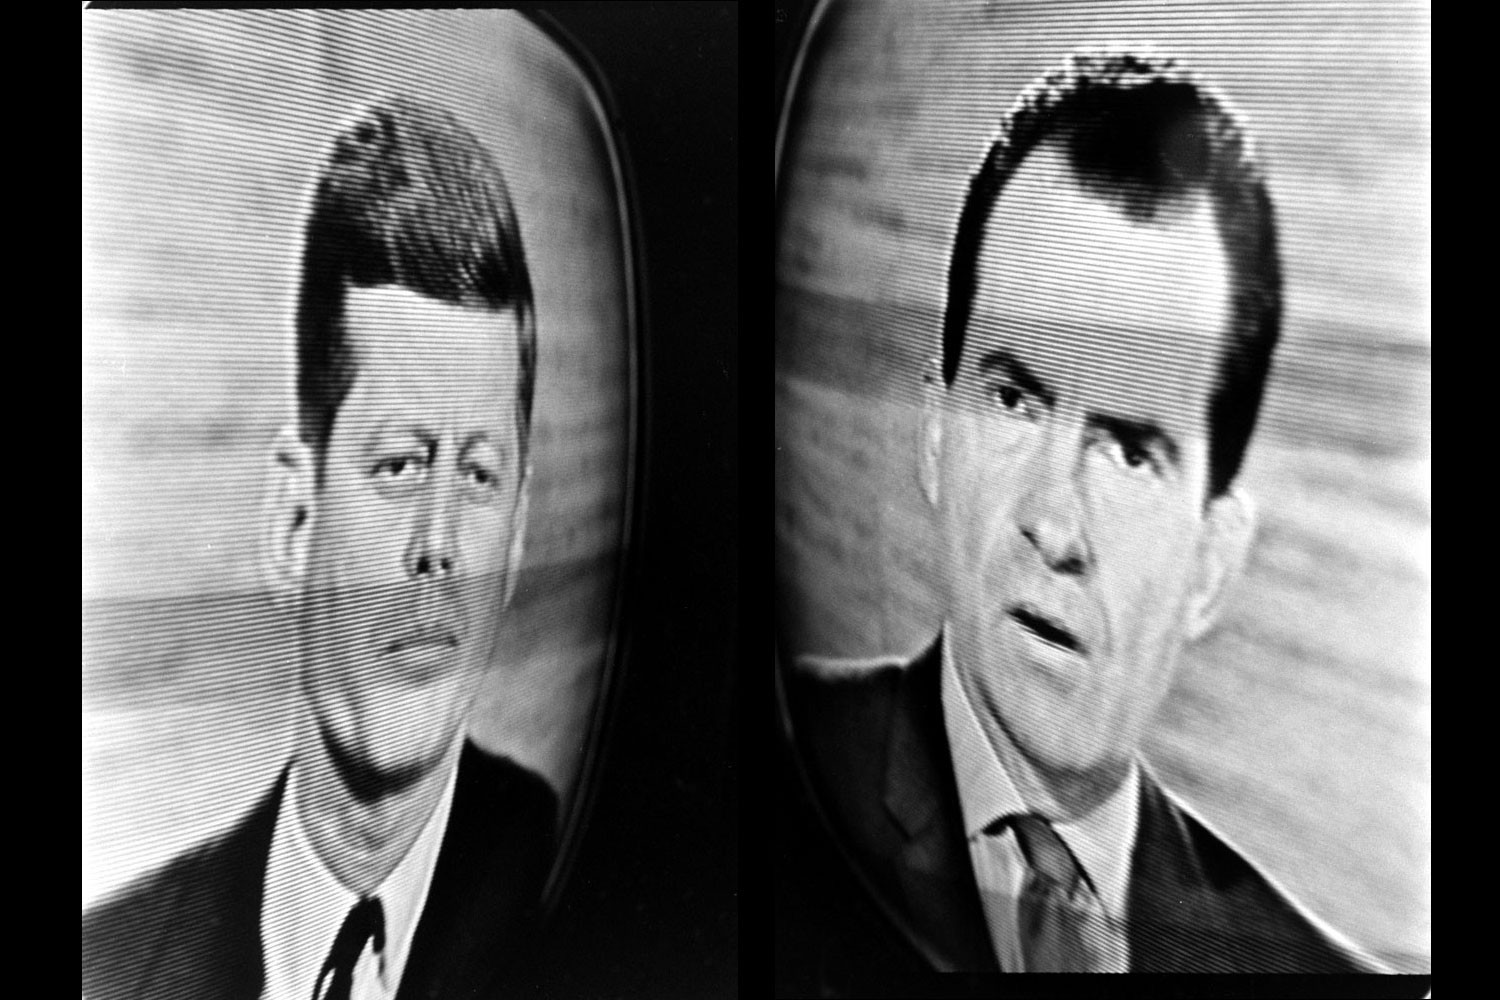 Two images made during the Kennedy-Nixon debates, 1960.